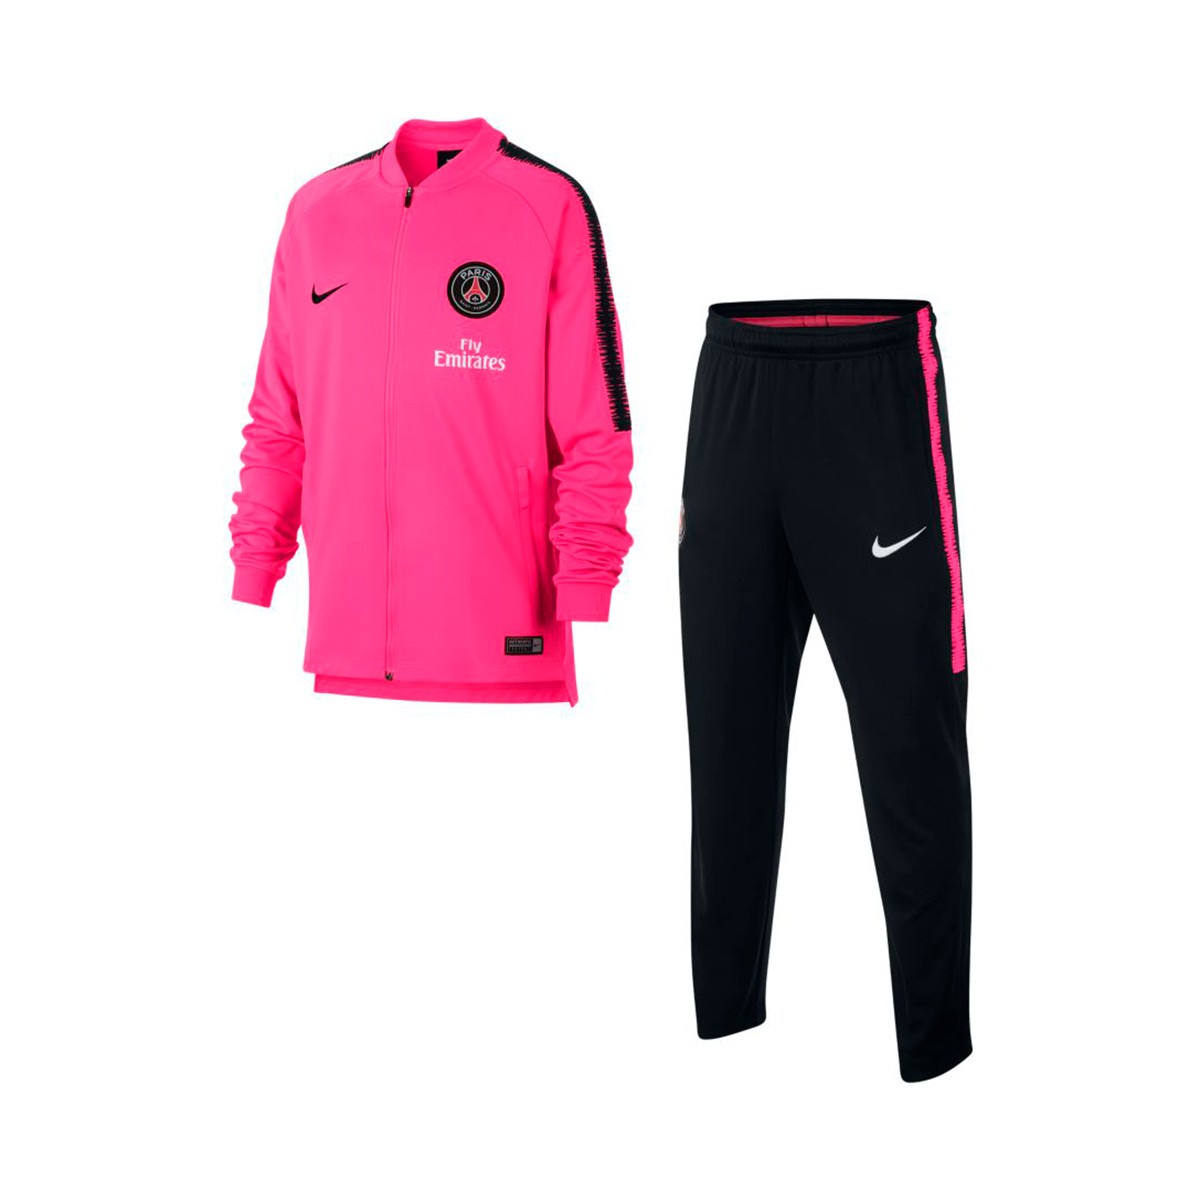 black and pink nike joggers